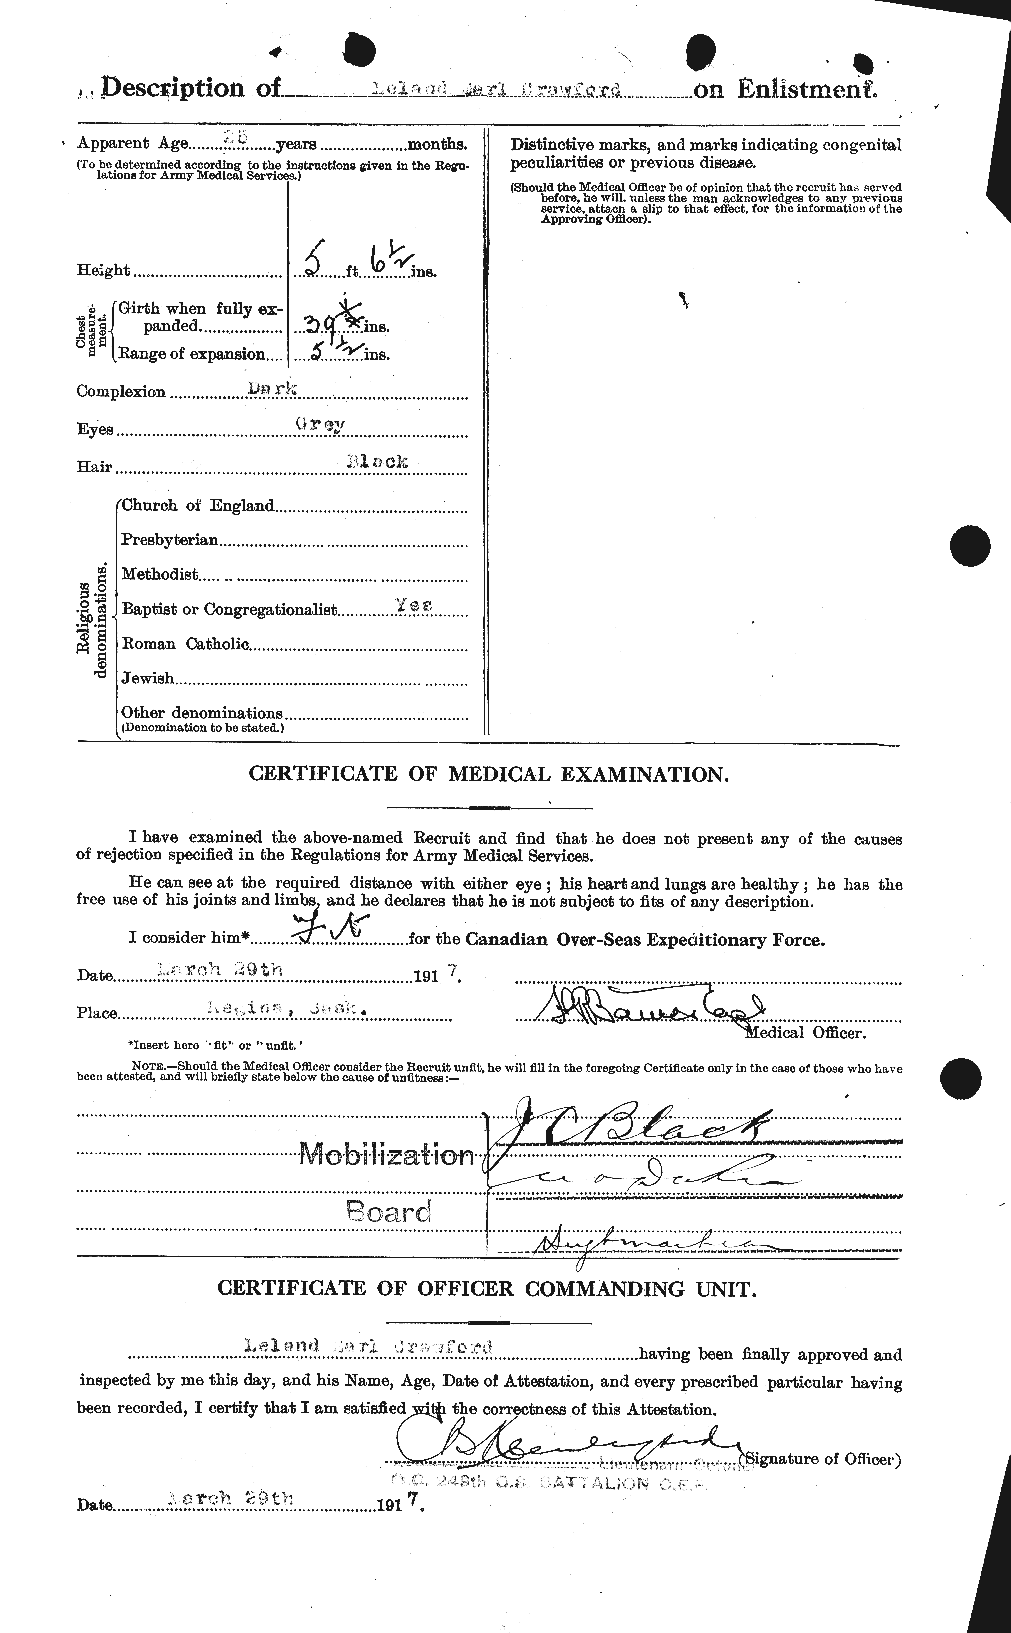 Personnel Records of the First World War - CEF 061800b